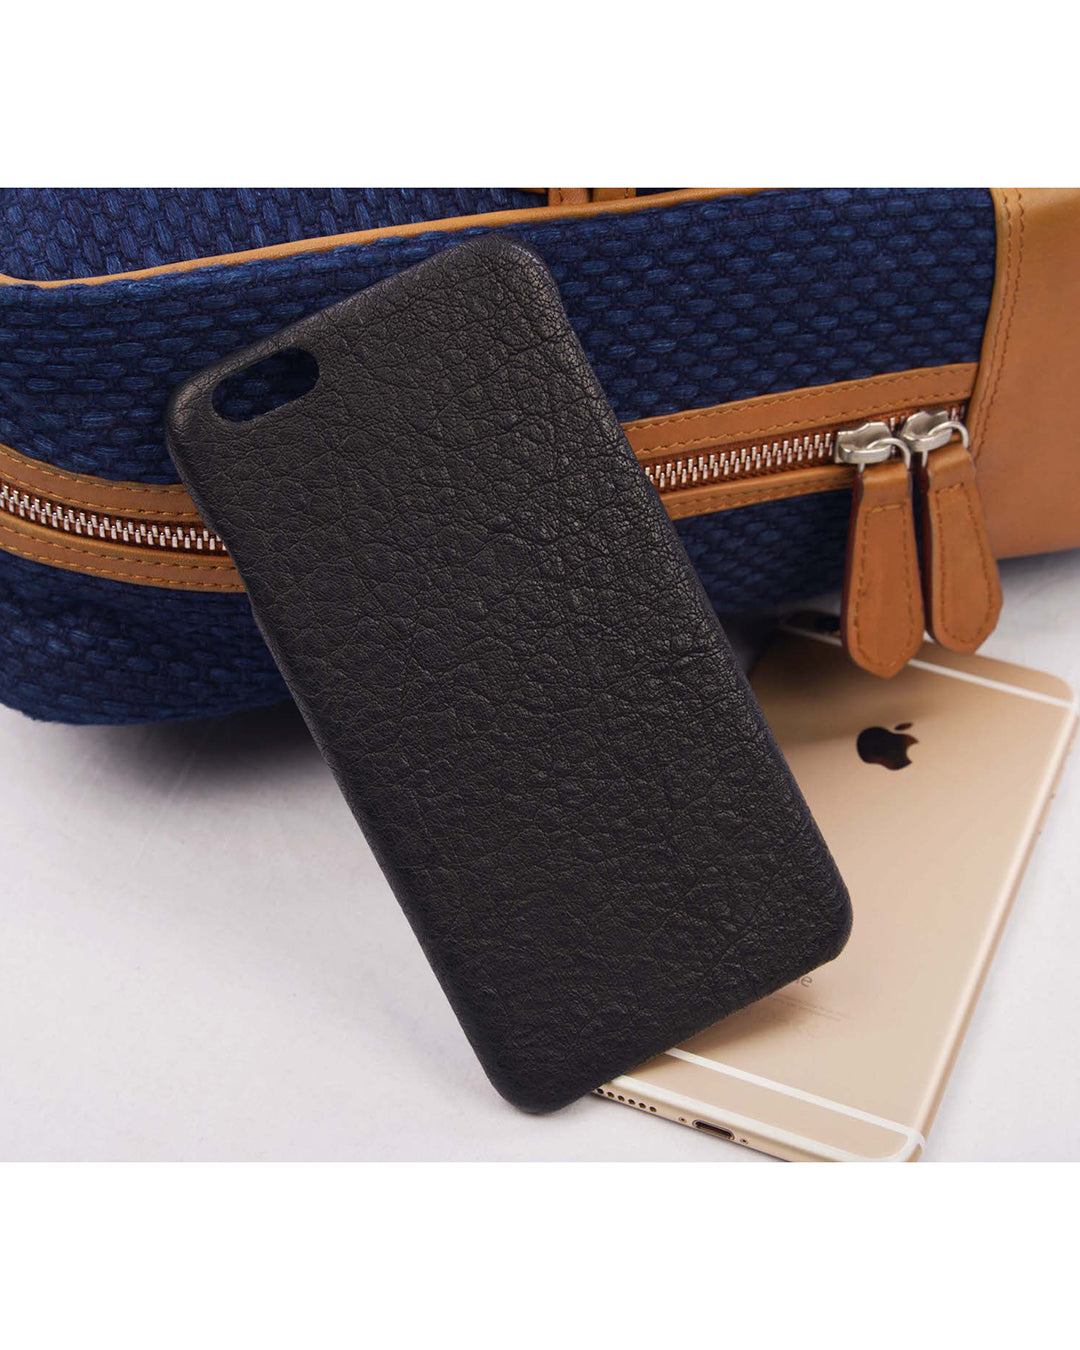 Leather Case for iPhone 6 & 6 Plus